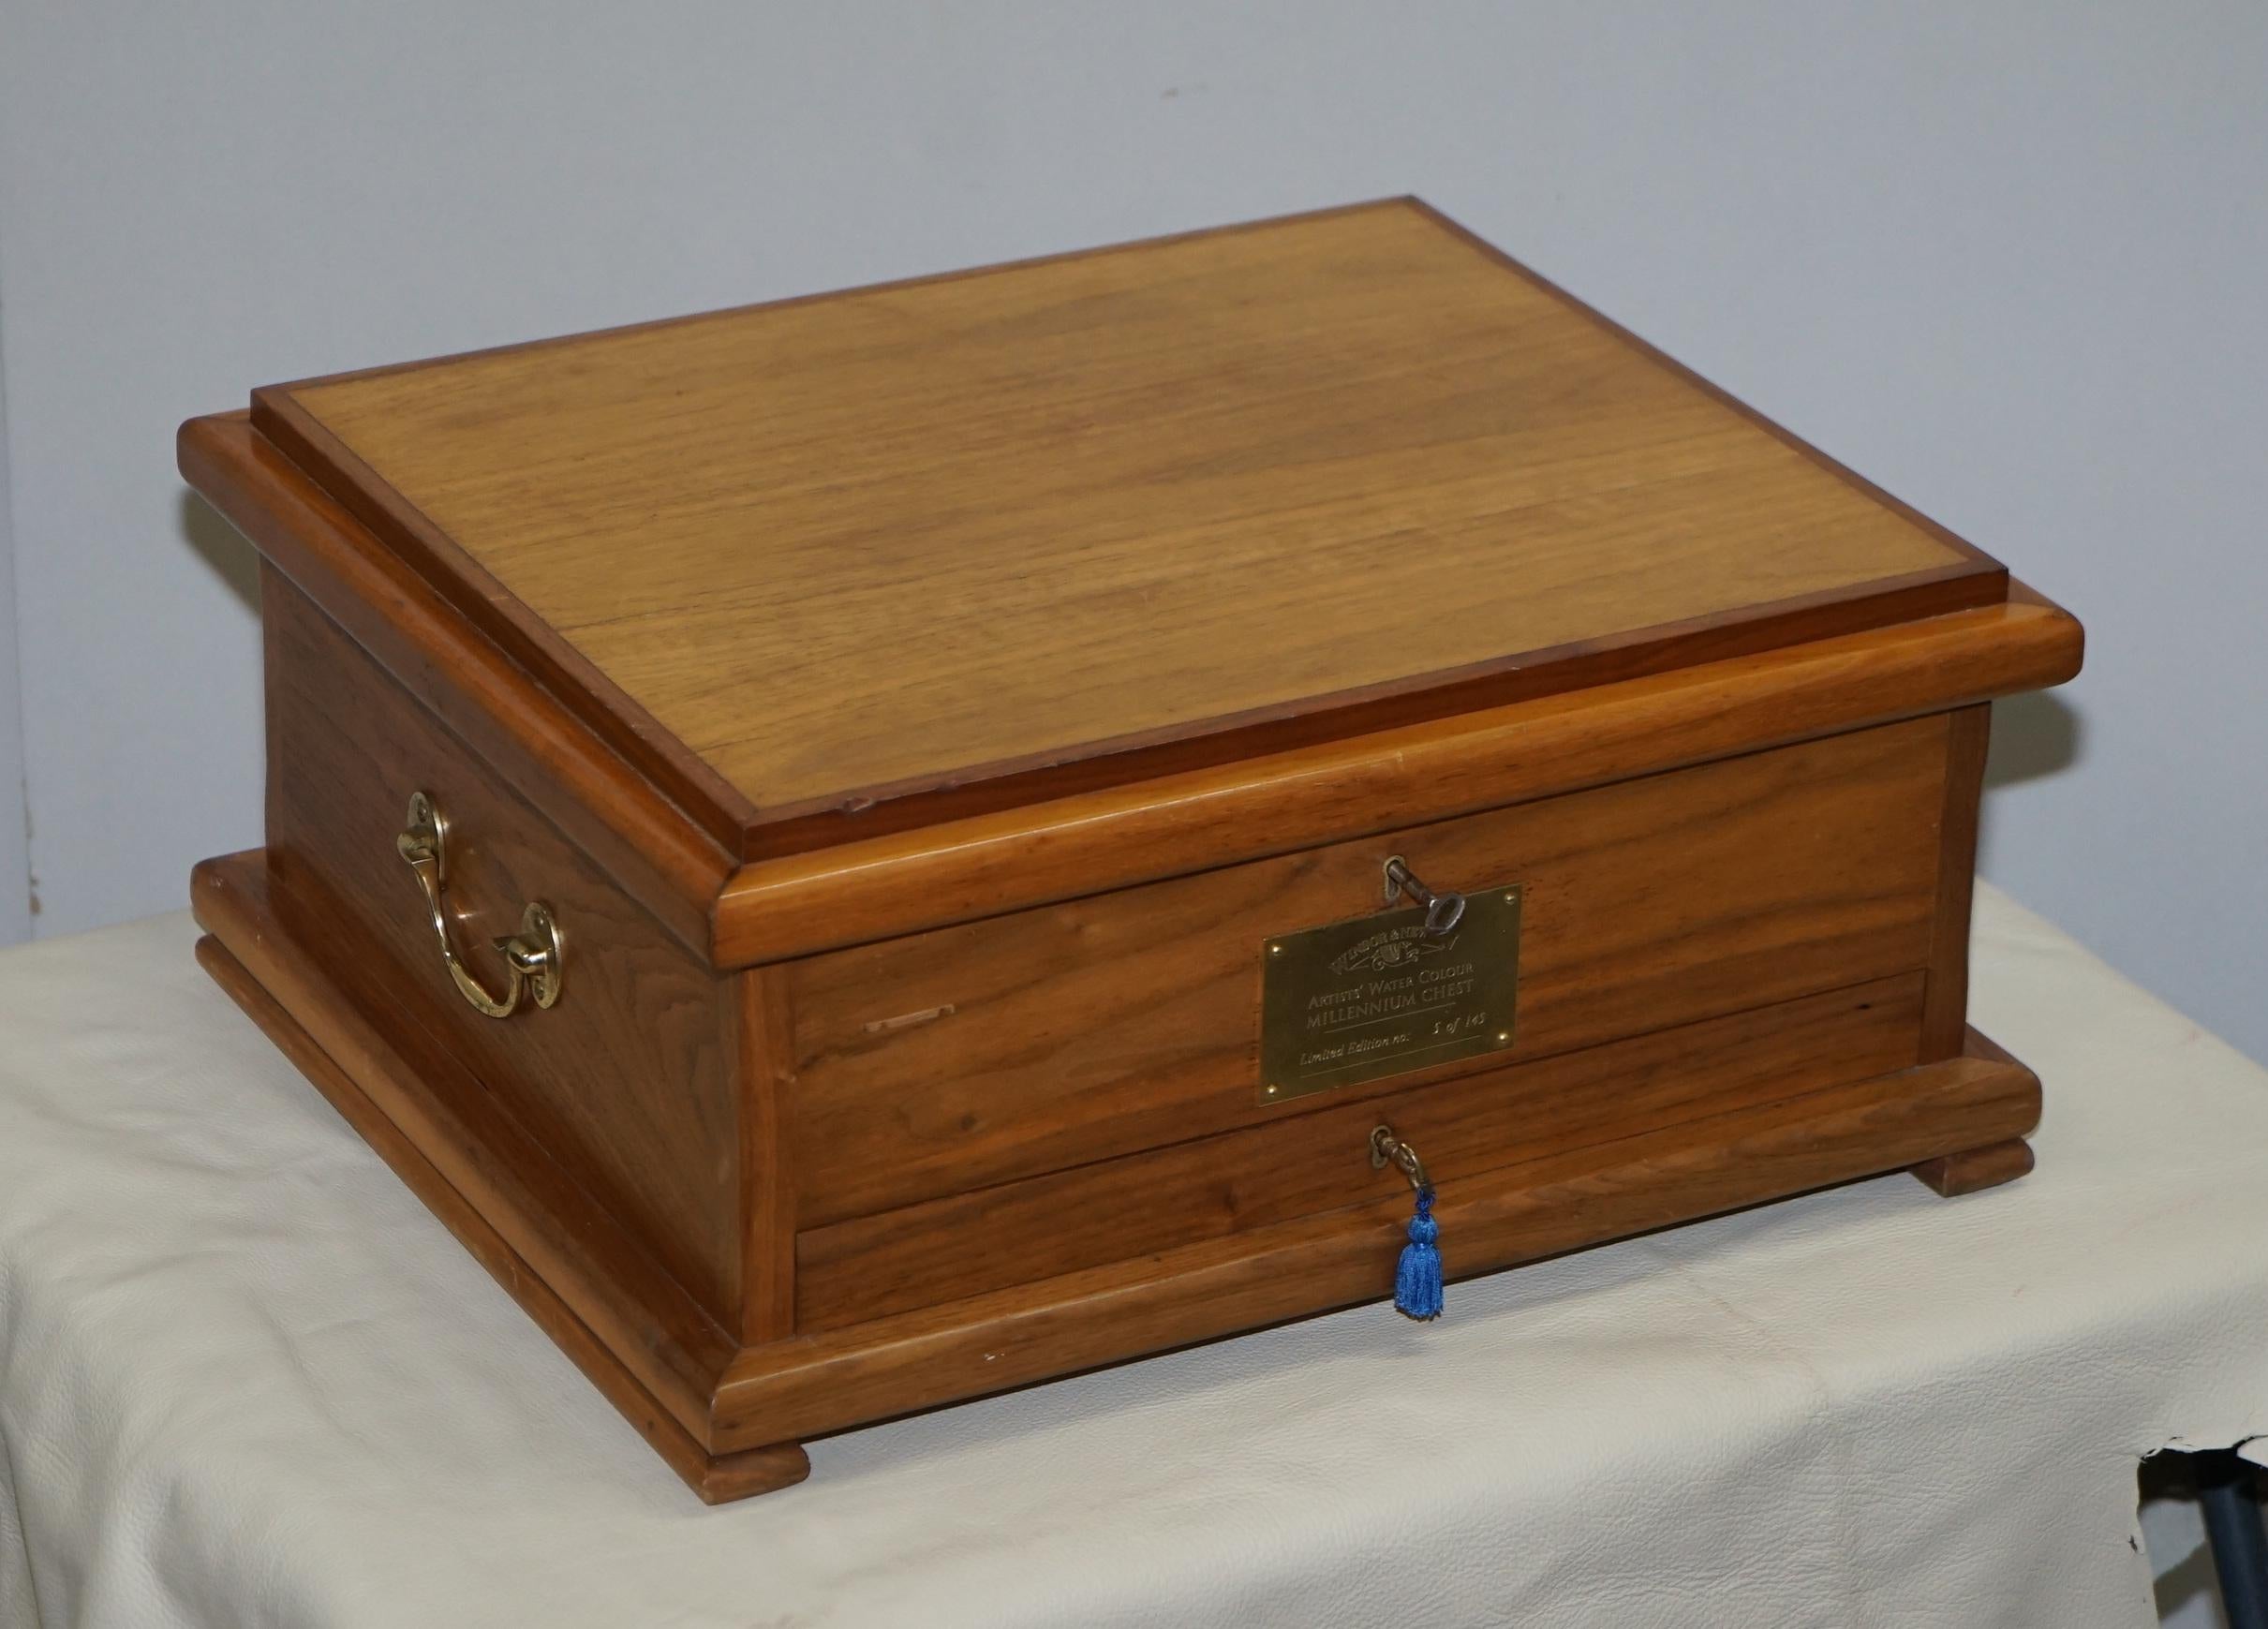 Wimbledon-Furniture

Wimbledon-Furniture is delighted to offer for sale this stunning hand made Limited Edition 5 / 145 Winsor & Newton Artists Watercolour Millennium chest

Please note the delivery fee listed is just a guide, it covers within